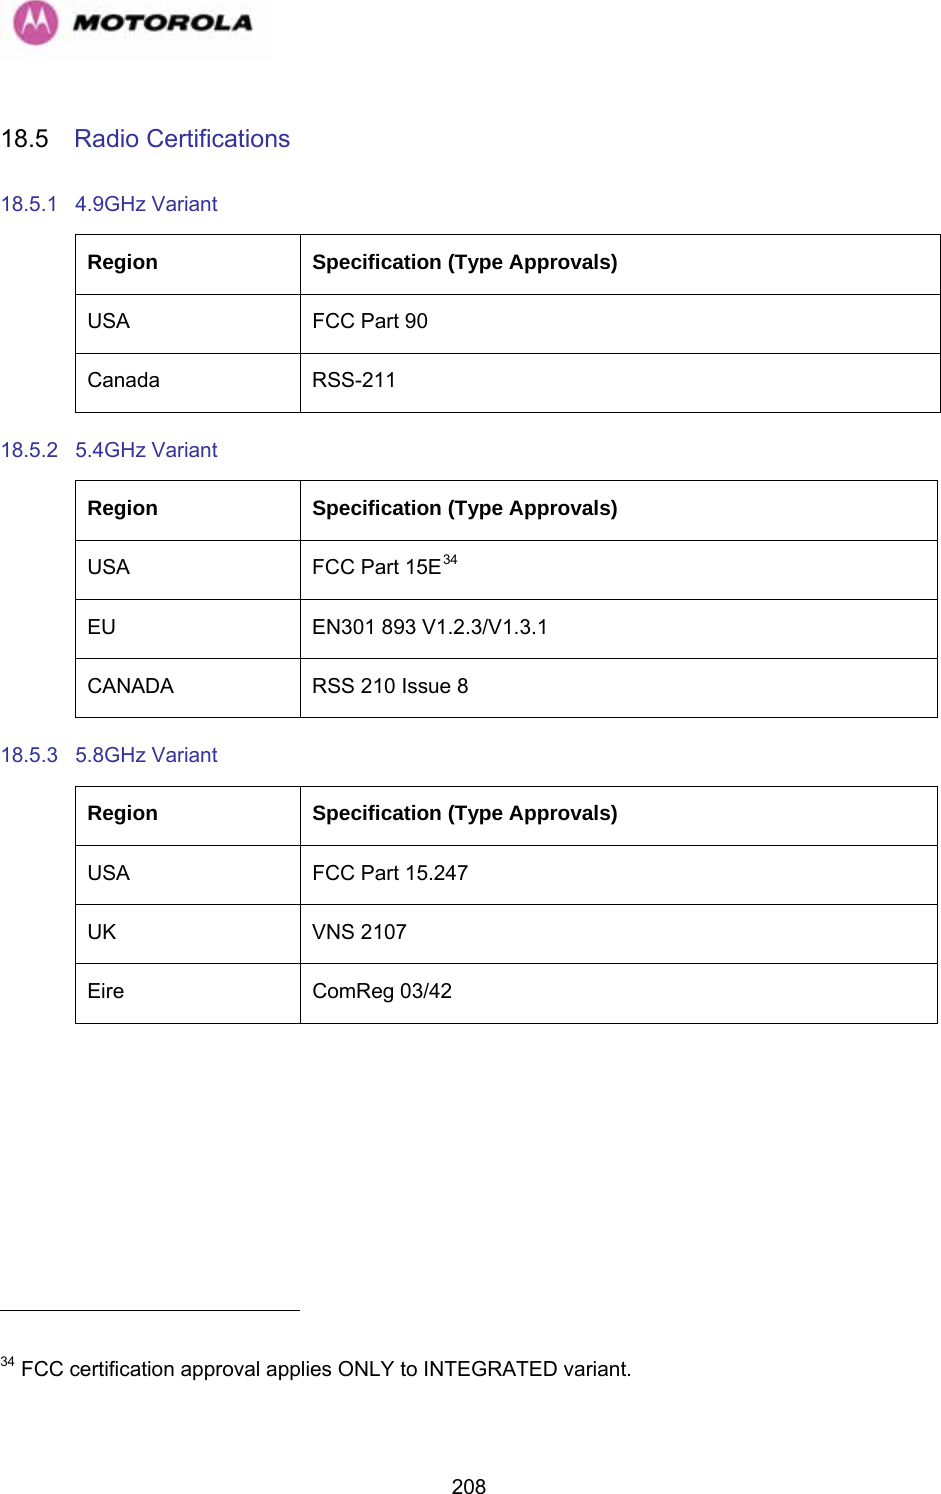   20818.5  Radio Certifications 18.5.1 4.9GHz Variant Region  Specification (Type Approvals) USA  FCC Part 90 Canada RSS-211 18.5.2 5.4GHz Variant Region  Specification (Type Approvals) USA  FCC Part 15E34EU  EN301 893 V1.2.3/V1.3.1 CANADA  RSS 210 Issue 8 18.5.3 5.8GHz Variant Region  Specification (Type Approvals) USA  FCC Part 15.247 UK VNS 2107 Eire ComReg 03/42                                                       34 FCC certification approval applies ONLY to INTEGRATED variant. 